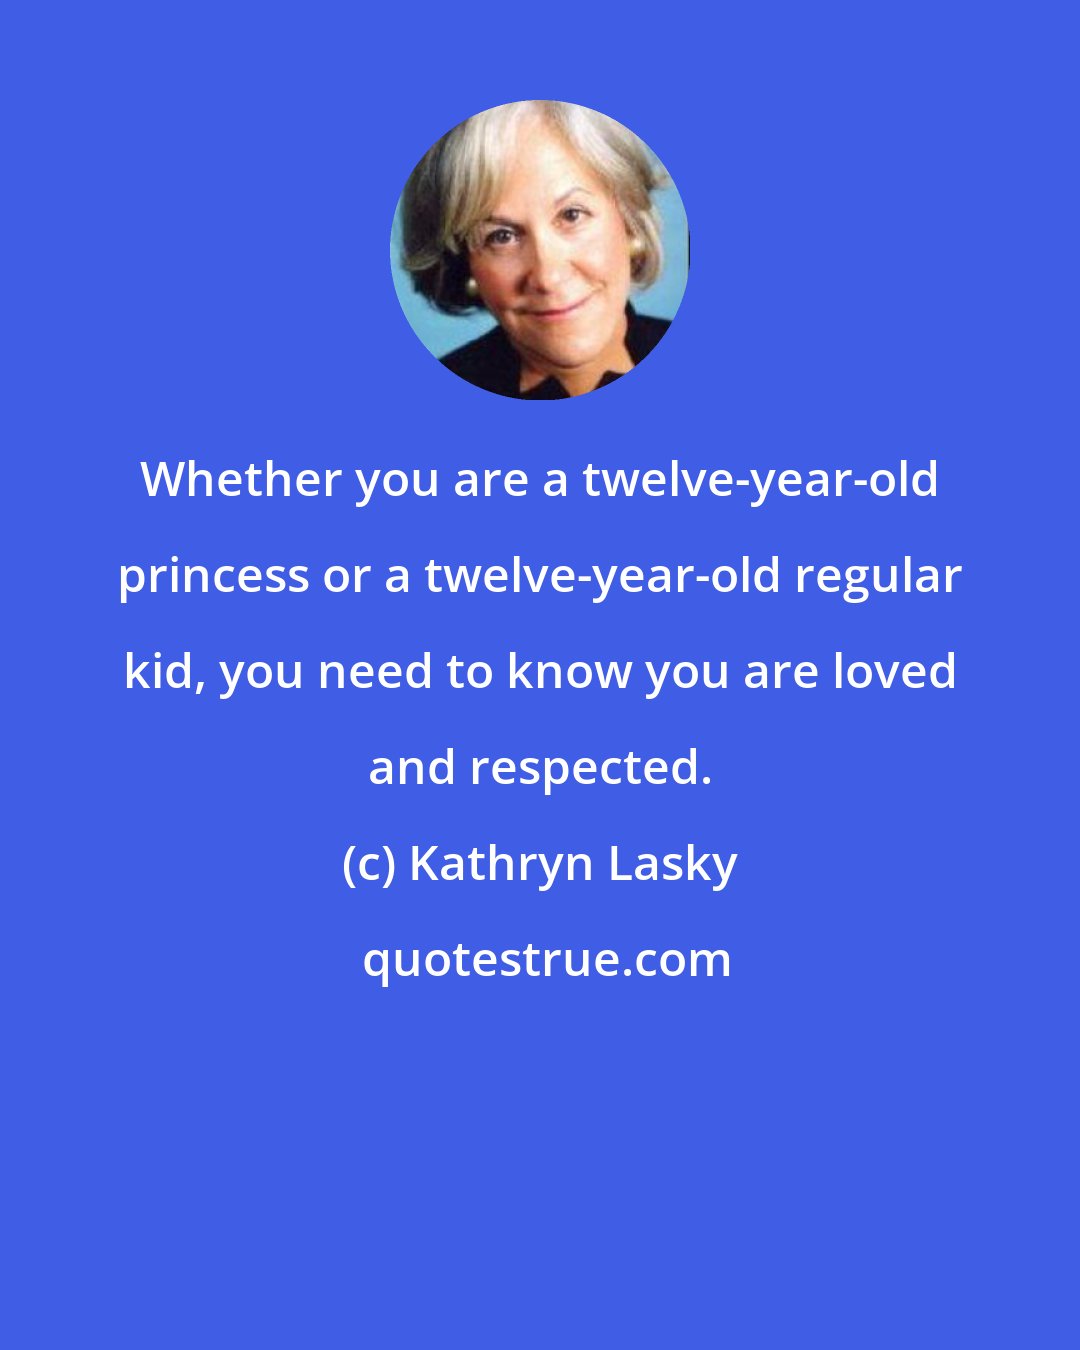 Kathryn Lasky: Whether you are a twelve-year-old princess or a twelve-year-old regular kid, you need to know you are loved and respected.